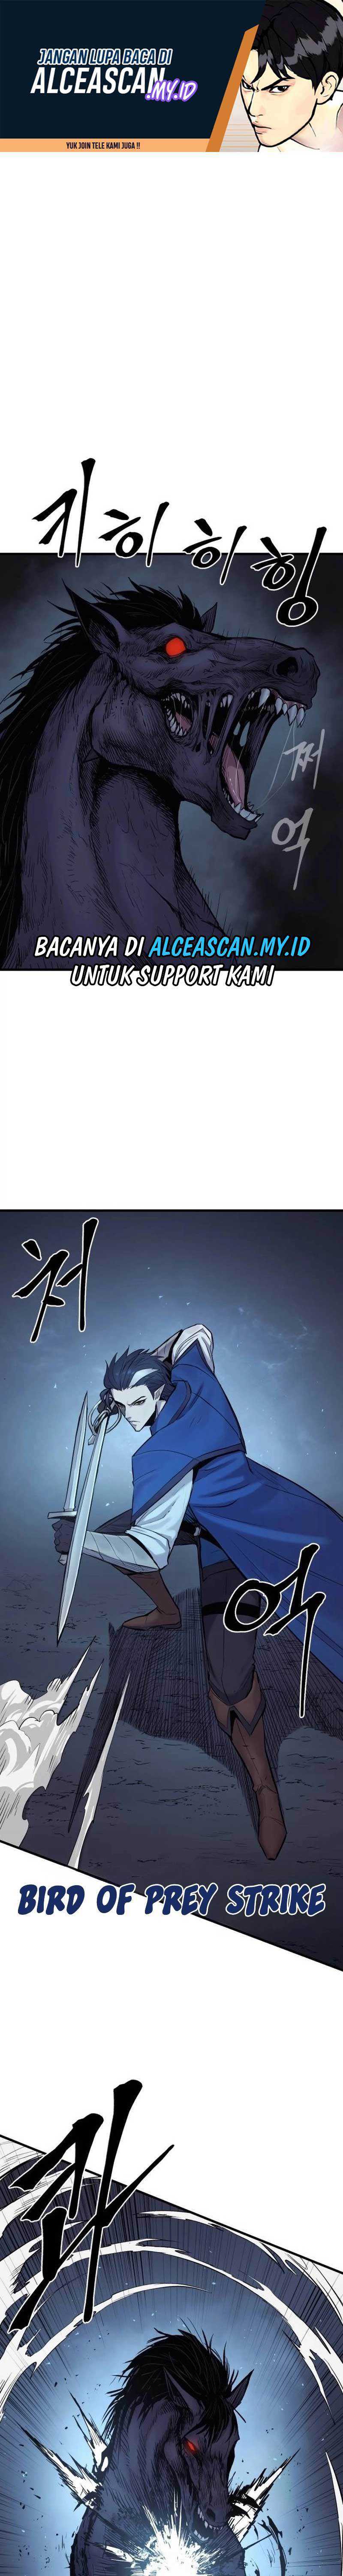 Howling Dragon (The Wailing Perversion) Chapter 23